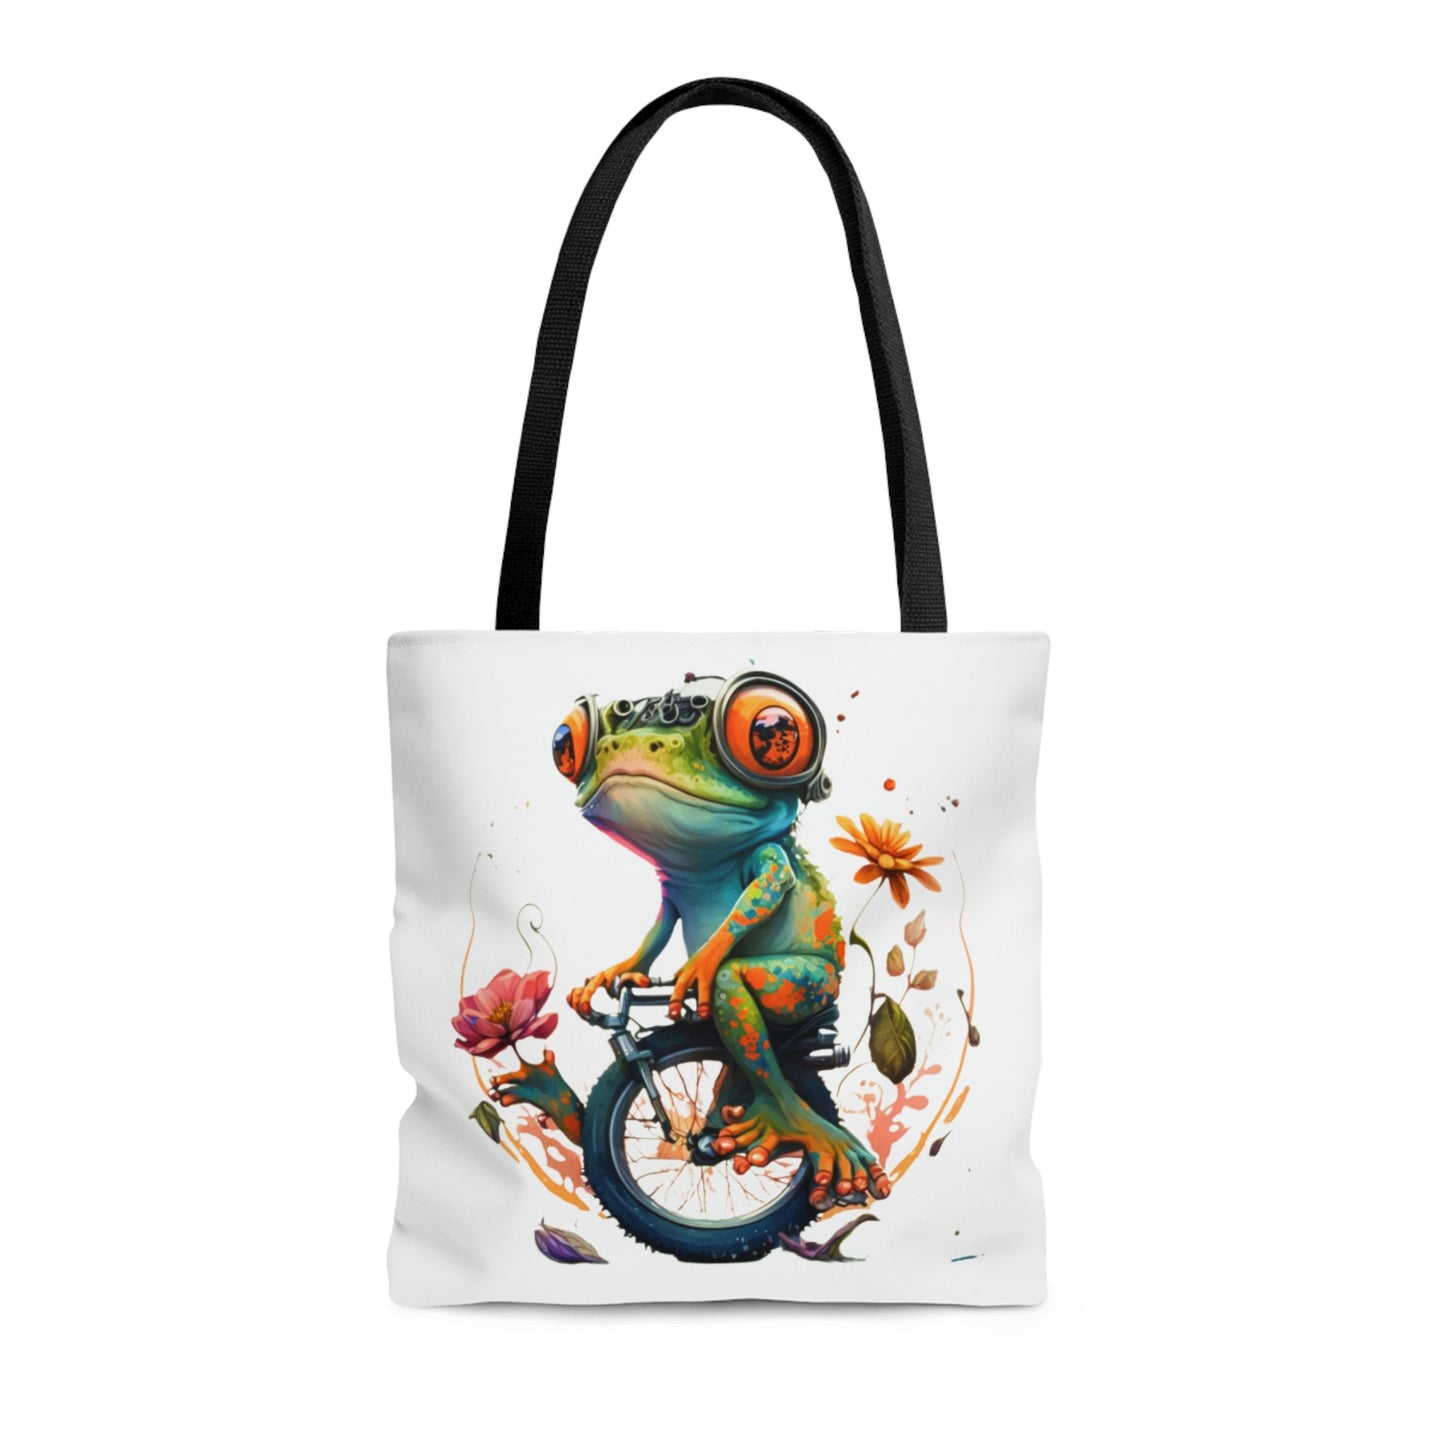 Reusable Shopping Bag Featuring a Charming Frog Riding a Bicycle